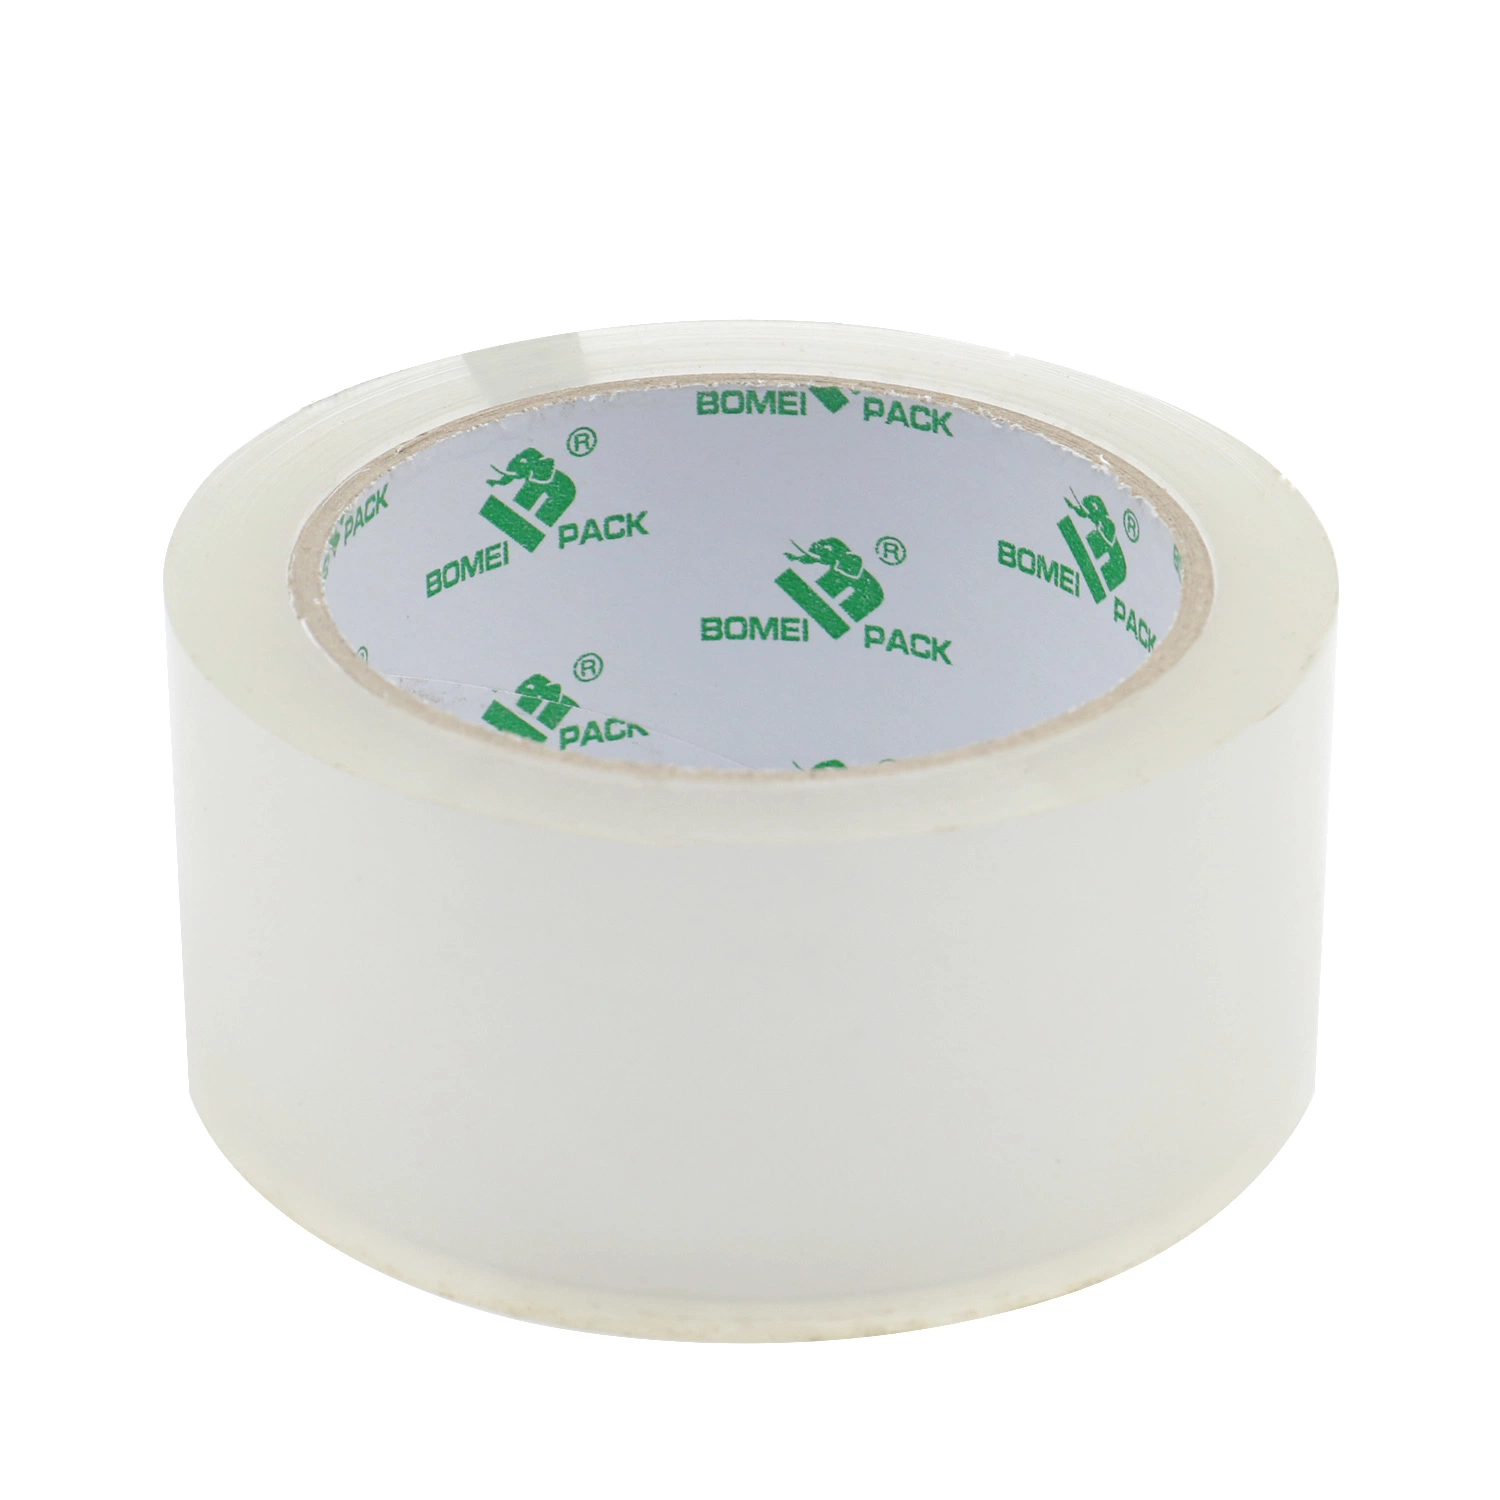 BOPP Film Adhesive Packing Tape Clear No Bubble No Noise Tape